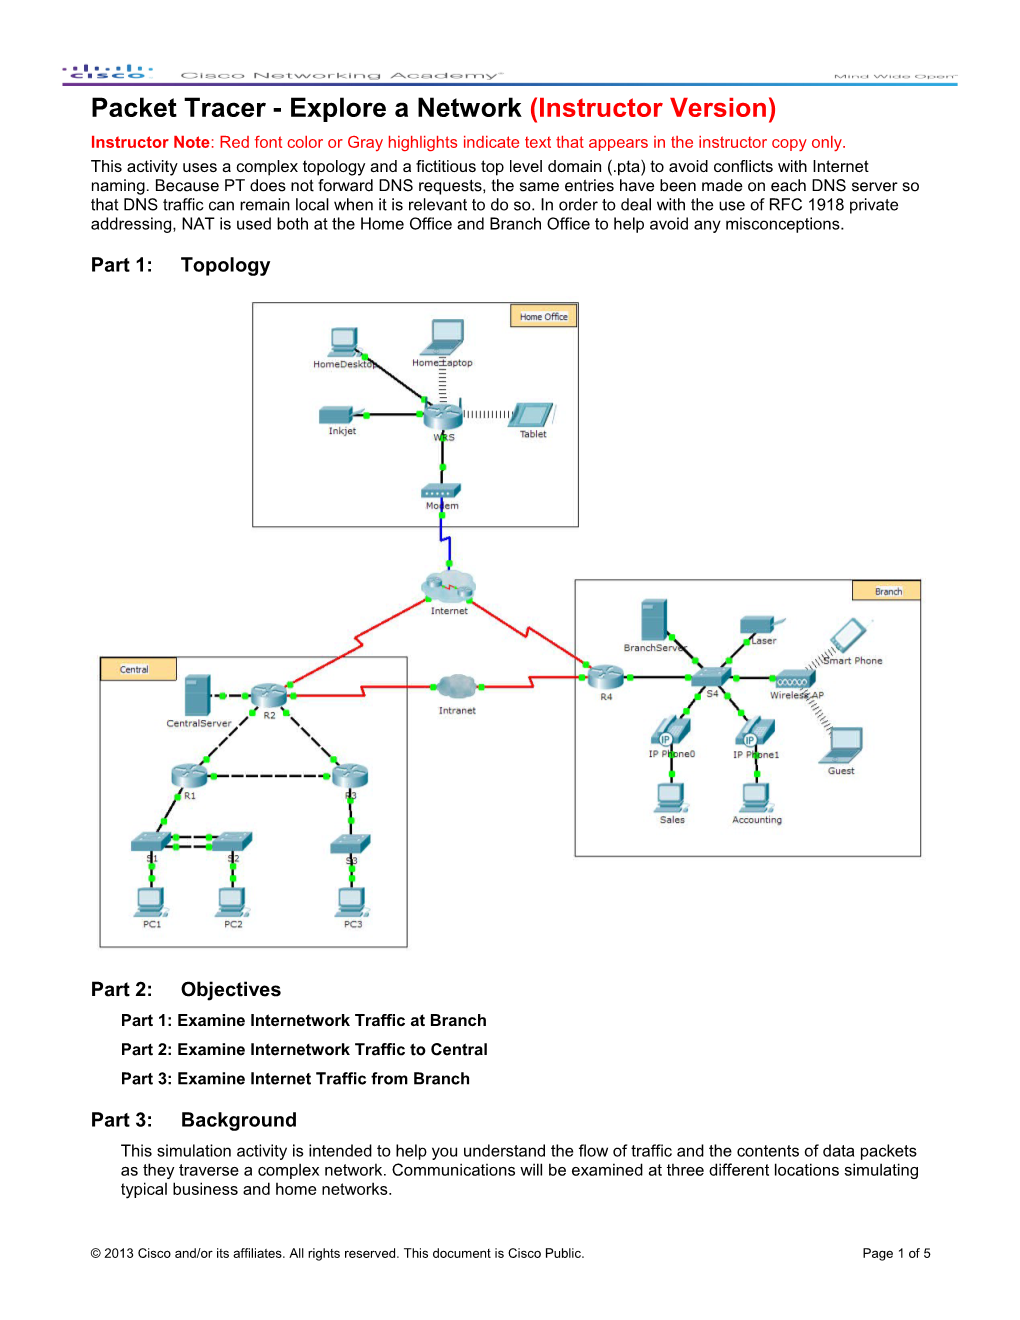 Packet Tracer - Explore a Network